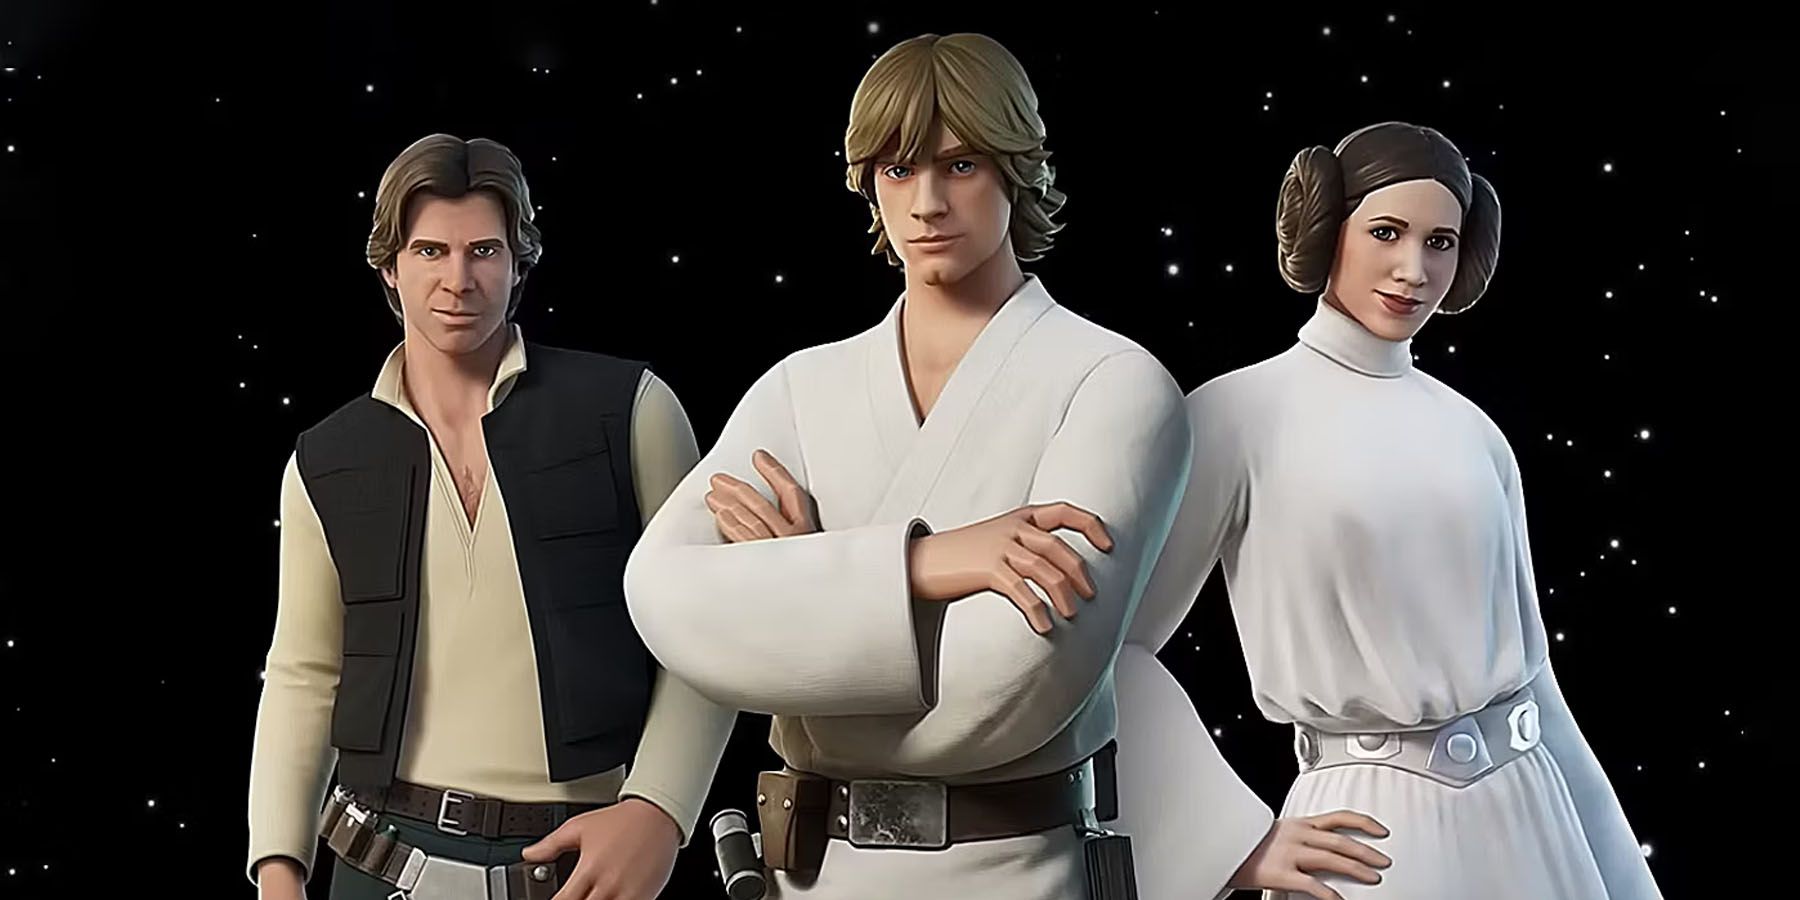 A promotional image of Luke Skywalker, Han Solo, and Princess Leia in Fortnite.